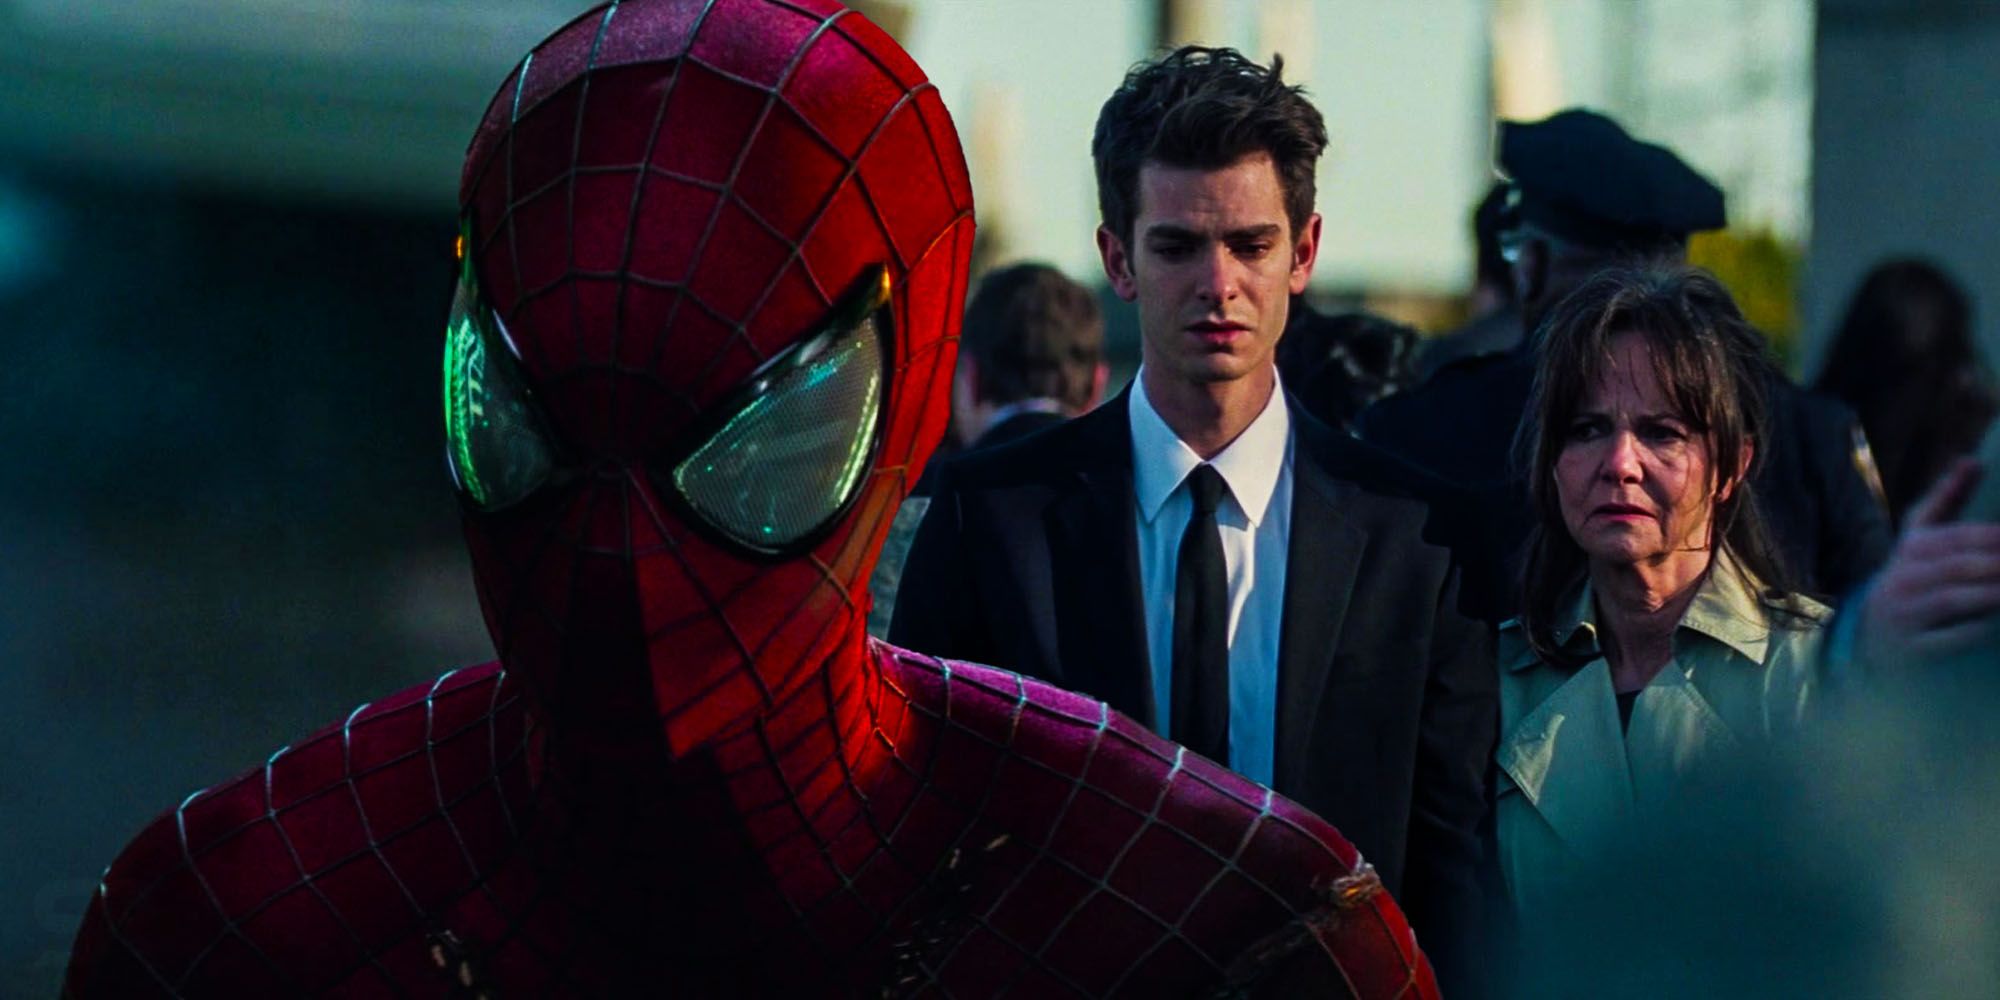 Amazing Spider-Man 2' ending: Where do we go from here?